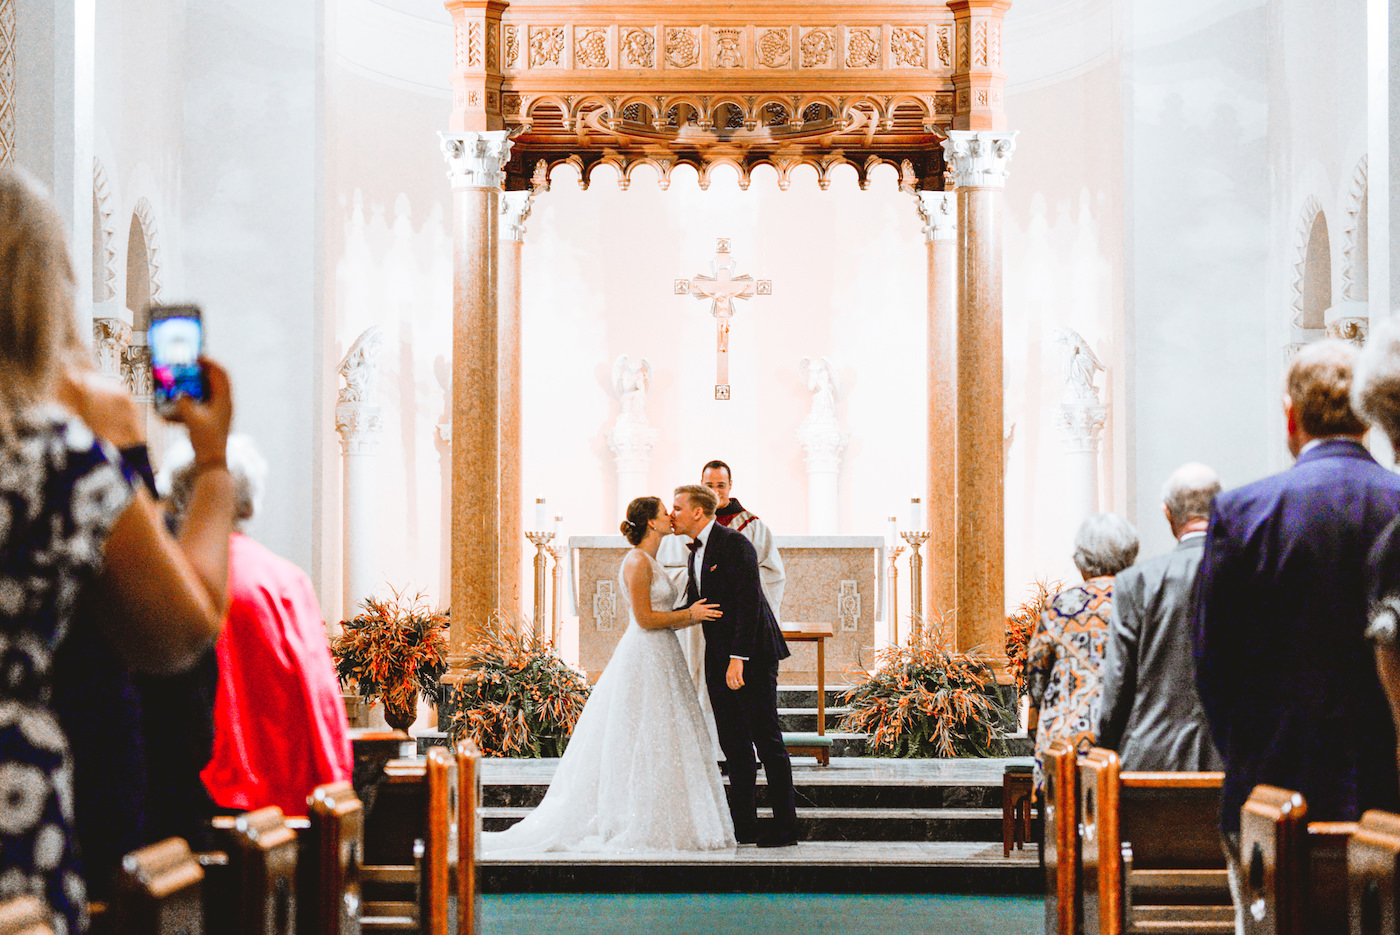 Bride and Groom First Kiss | Indoor Church Catholic Wedding Ceremony in St. Pete Florida